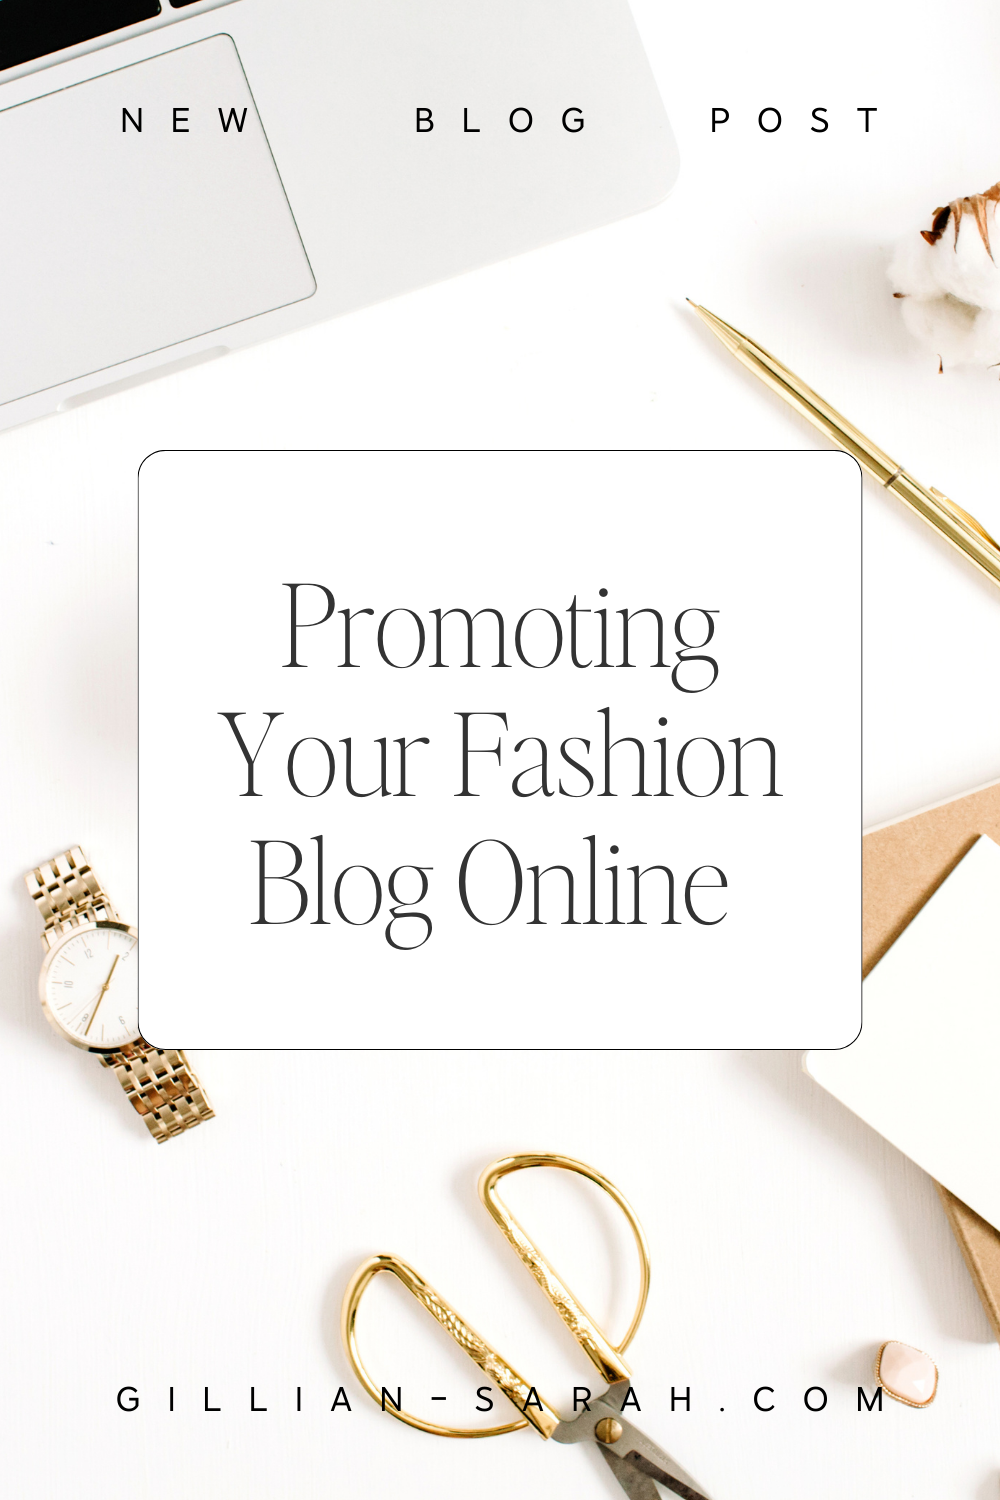 The Best Promotion Strategies for Your Fashion Blog - Gillian Sarah